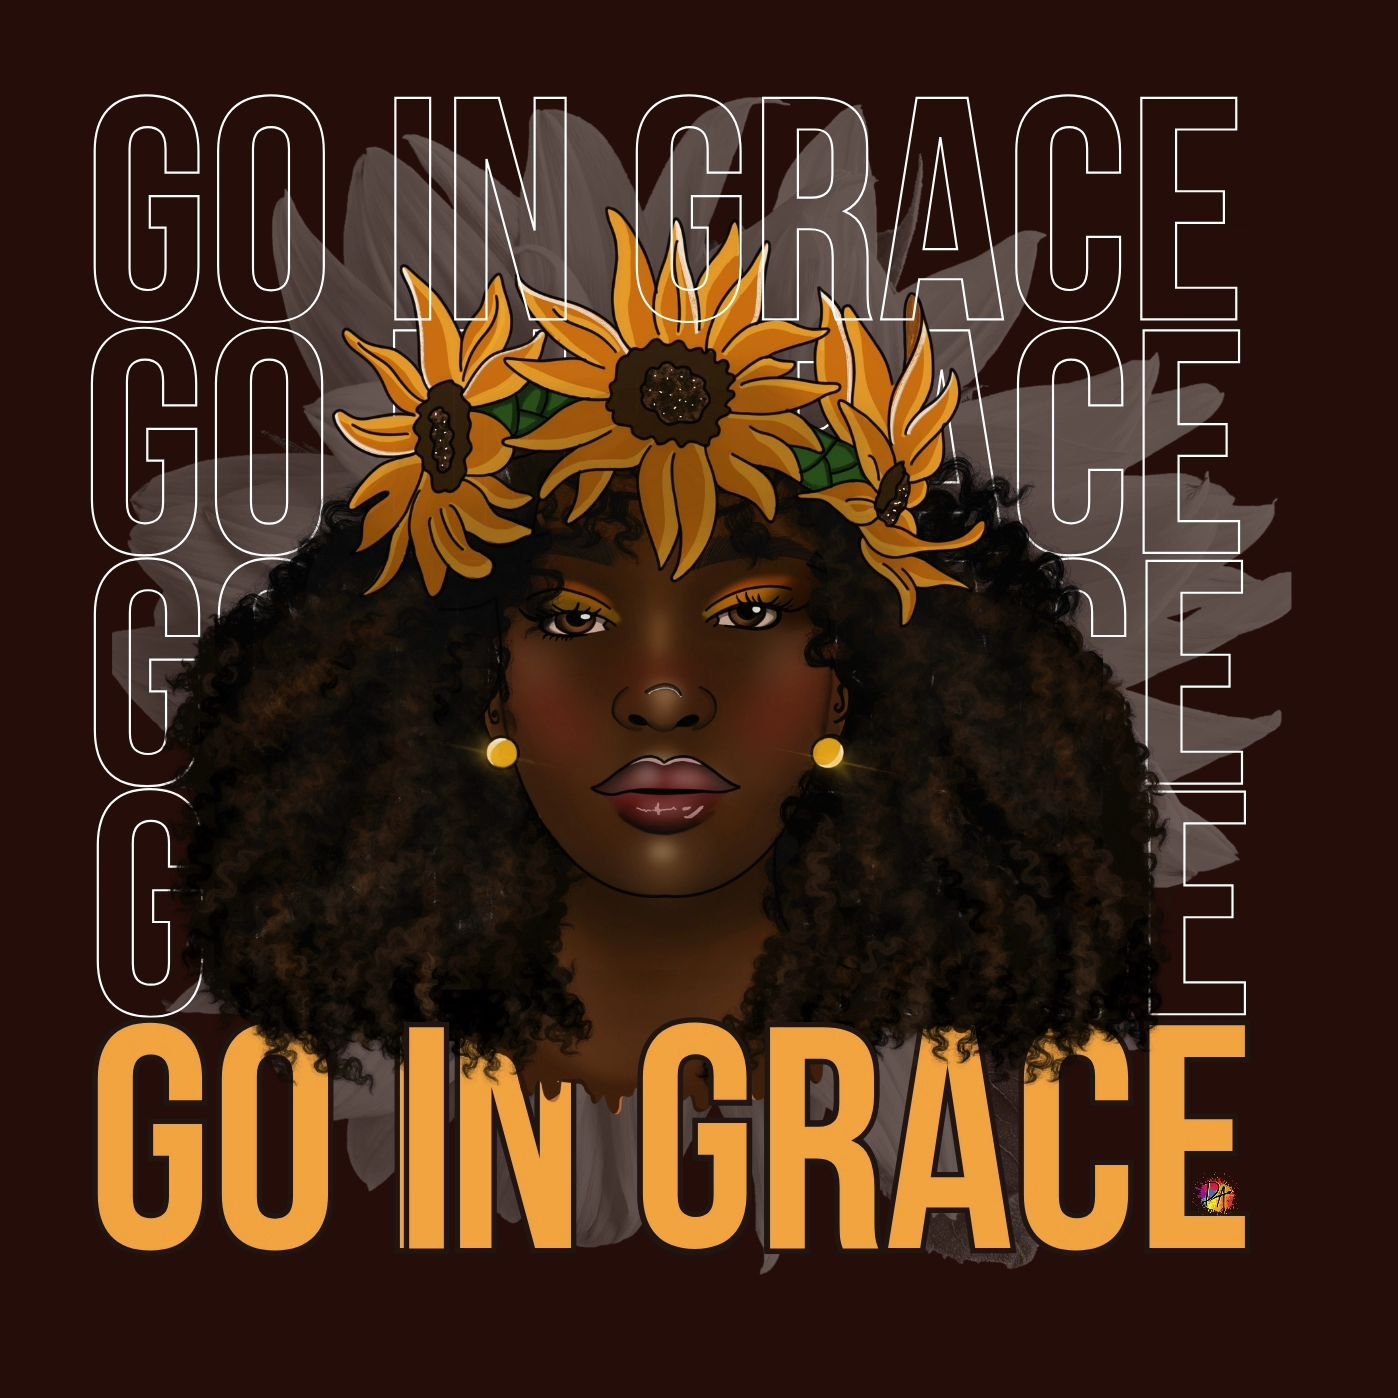 Let's talk about grace, shall we? 2 Corinthians 9 says, 'My grace is sufficient for you, for my power is made perfect in weakness.' And let me tell you, that's some powerful stuff. 
God's grace and mercy covers a multitude of our sins, and we are tru